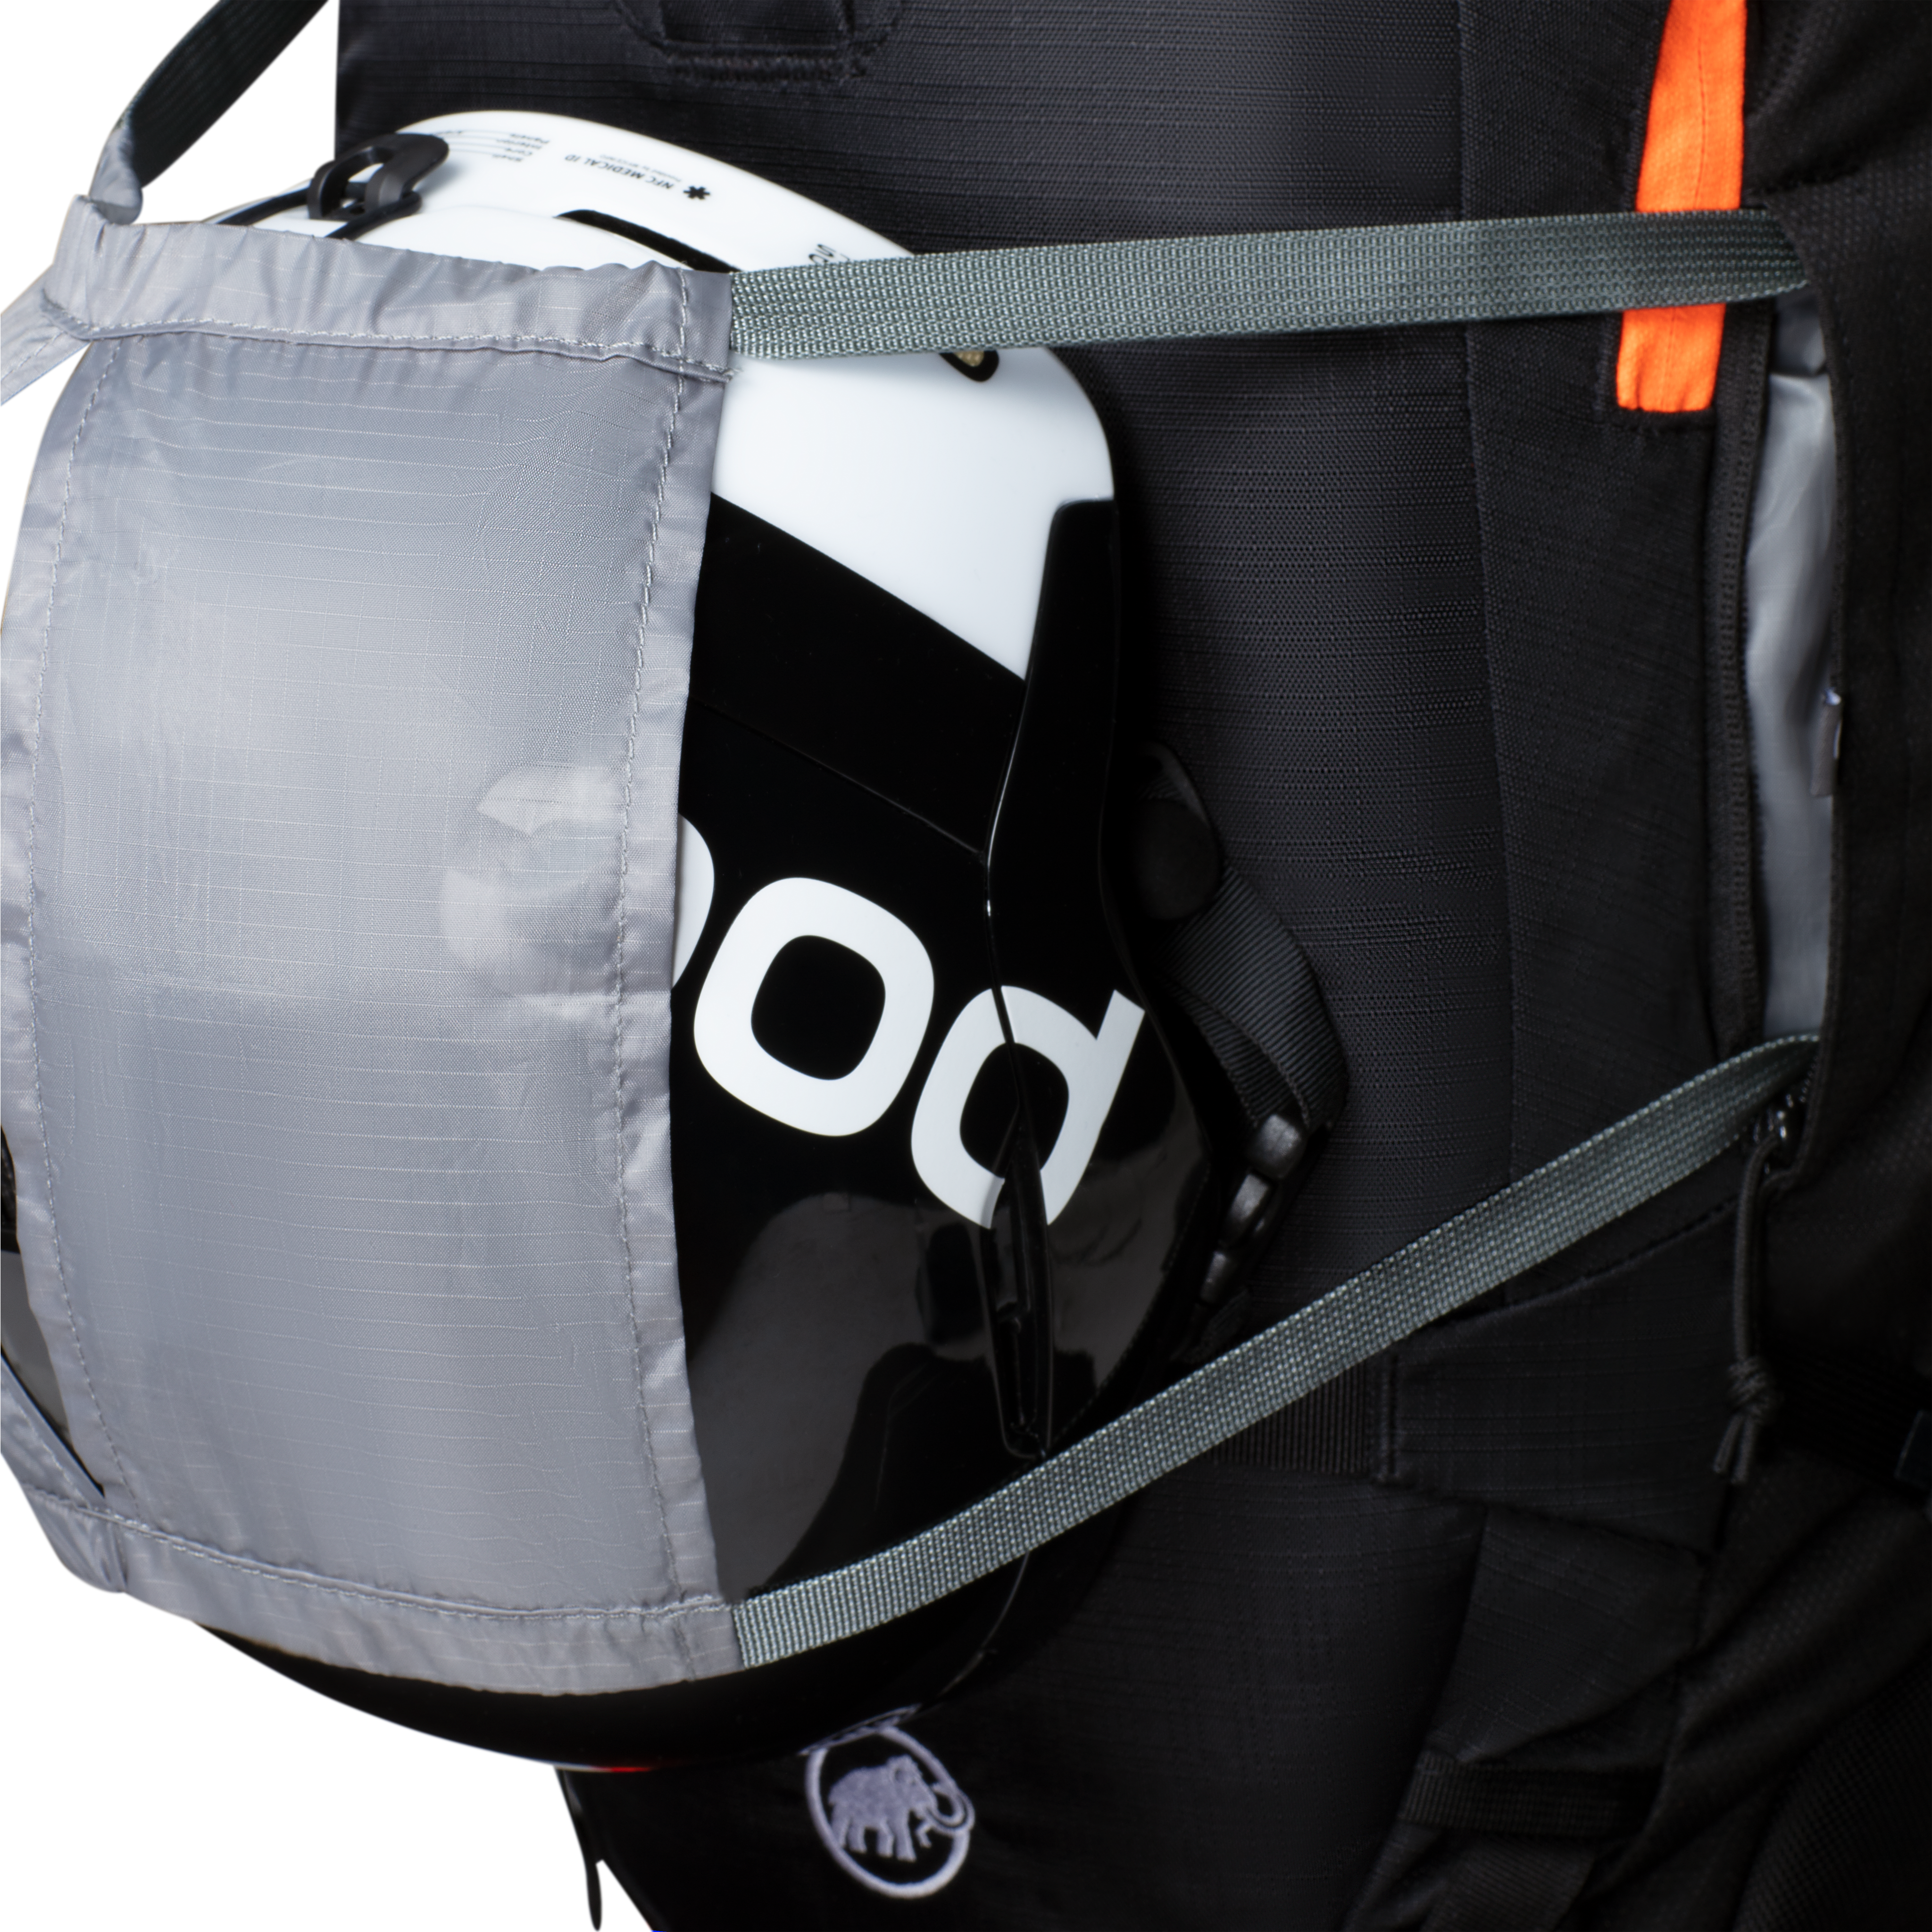 Pro Removable Airbag 3.0 product image